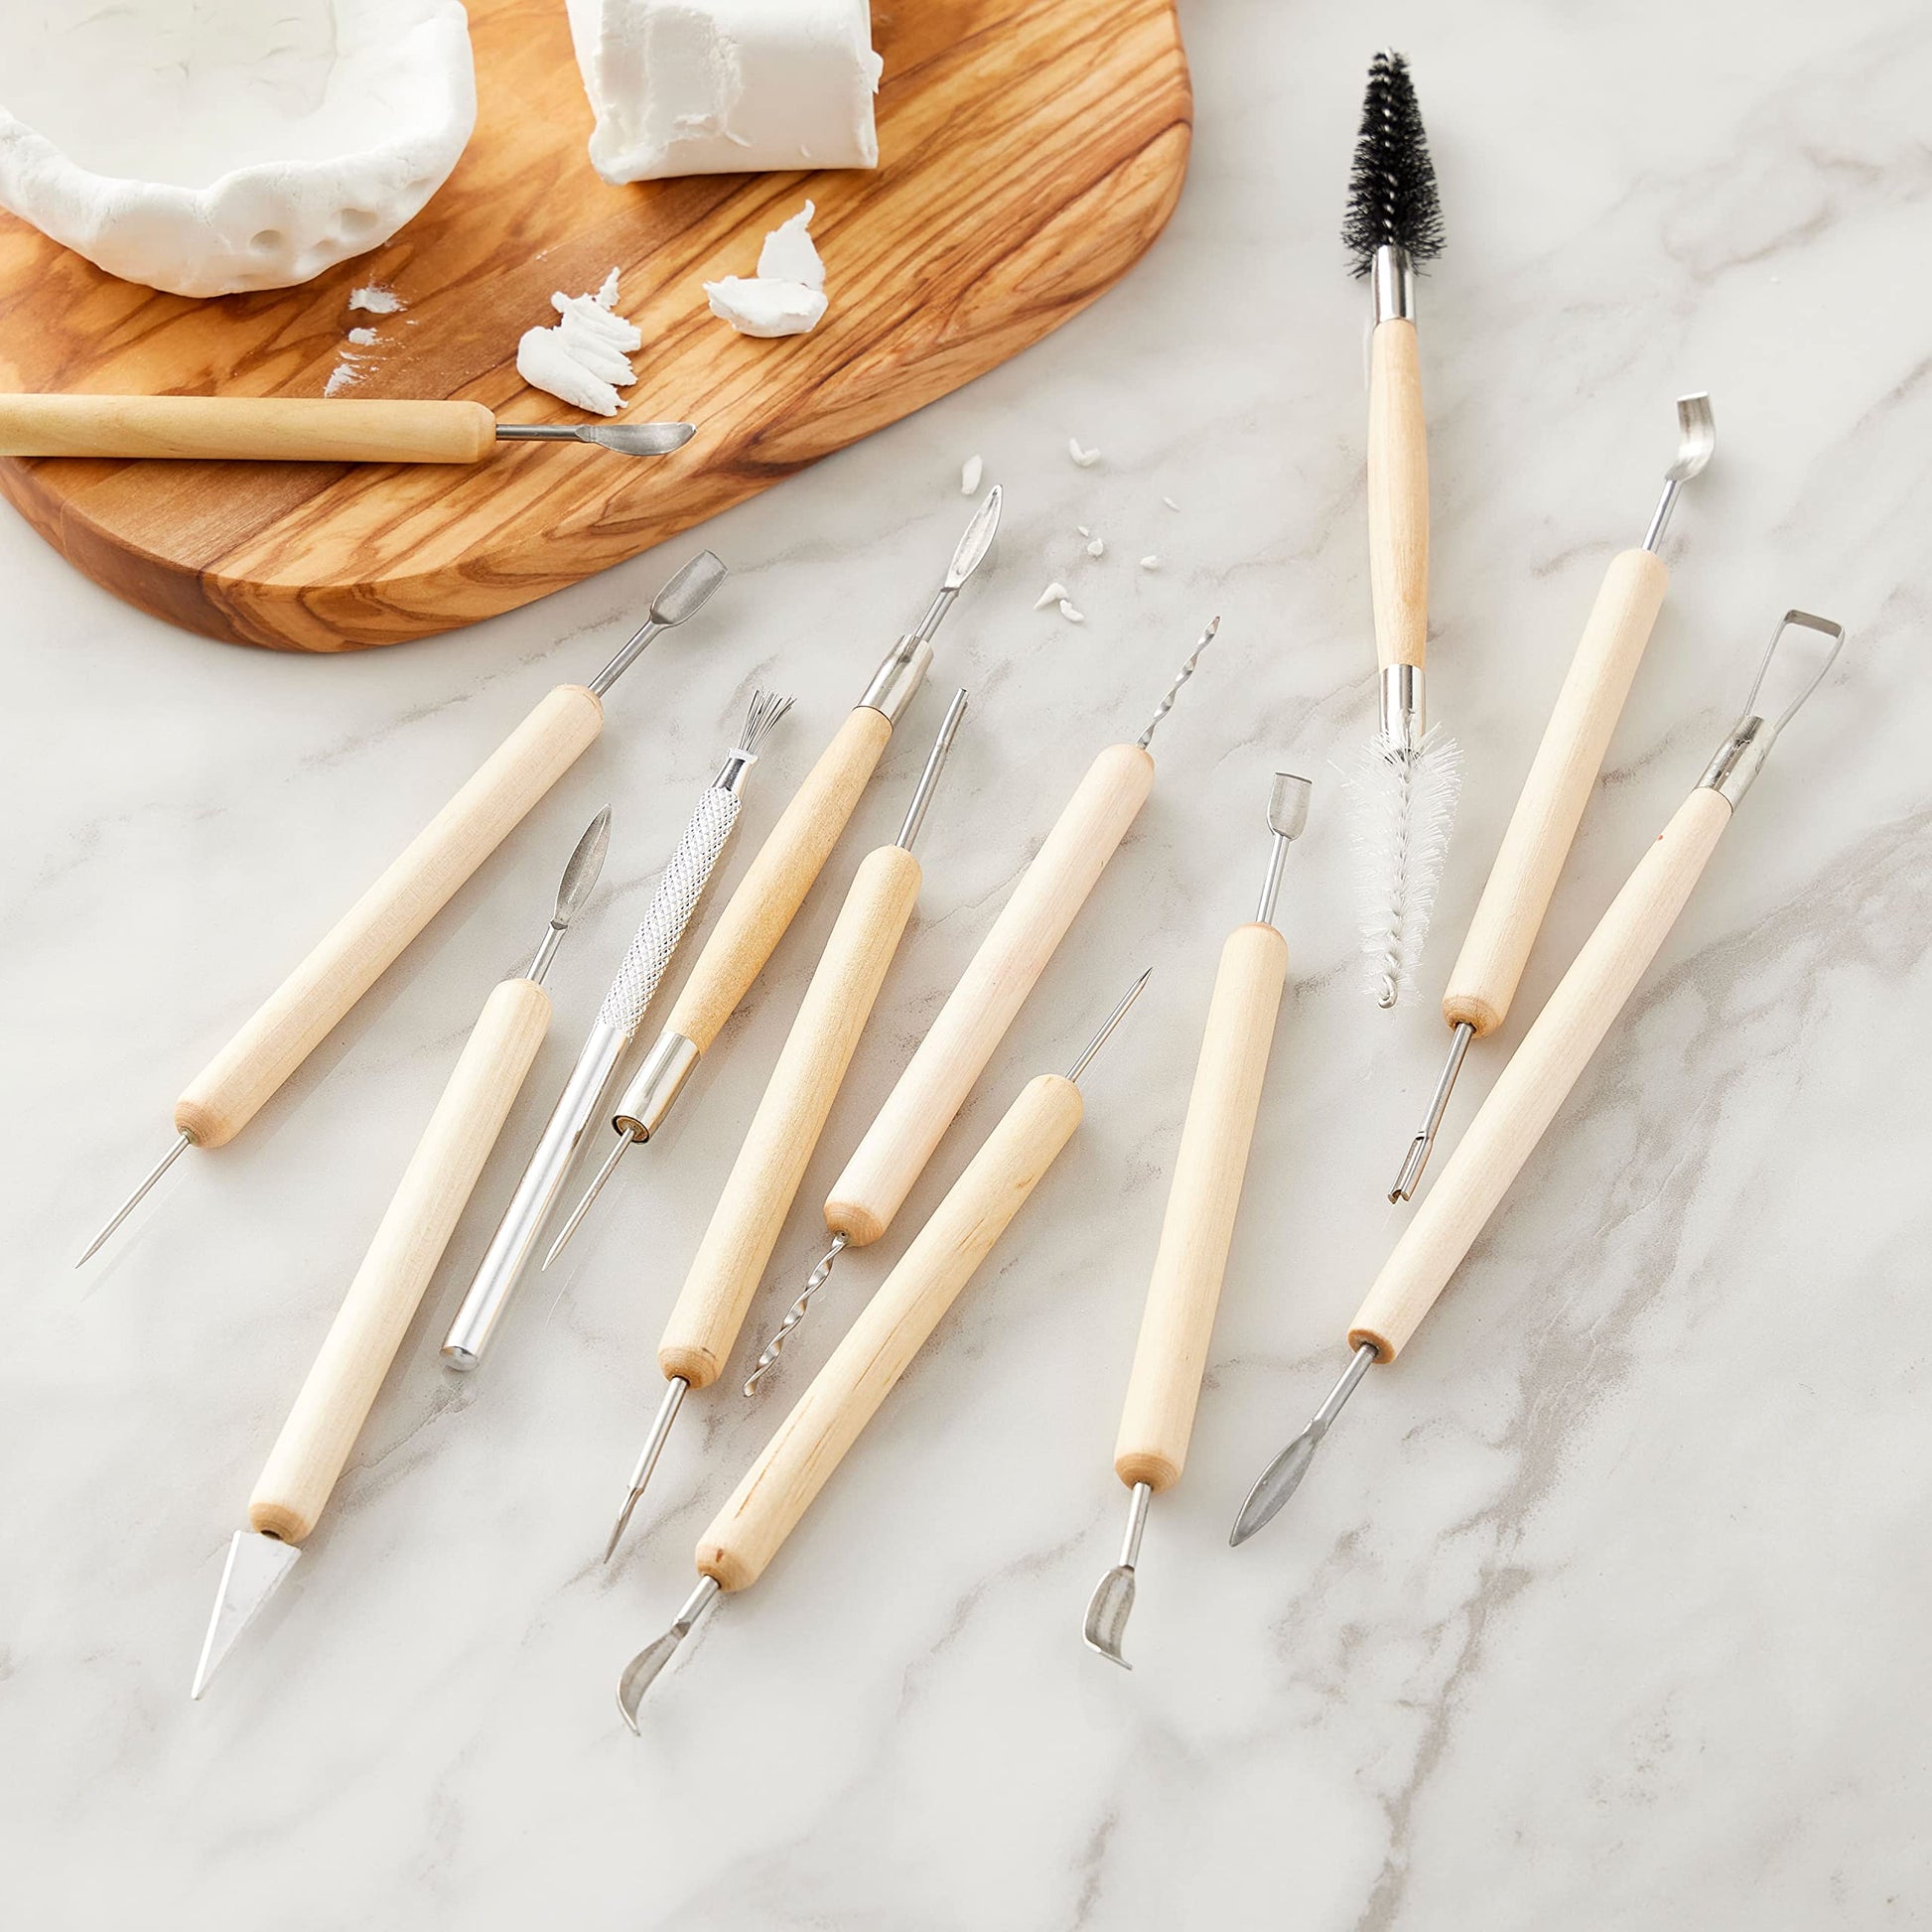 6 Pack: Embossing Stylus Tool Set by Craft Smart